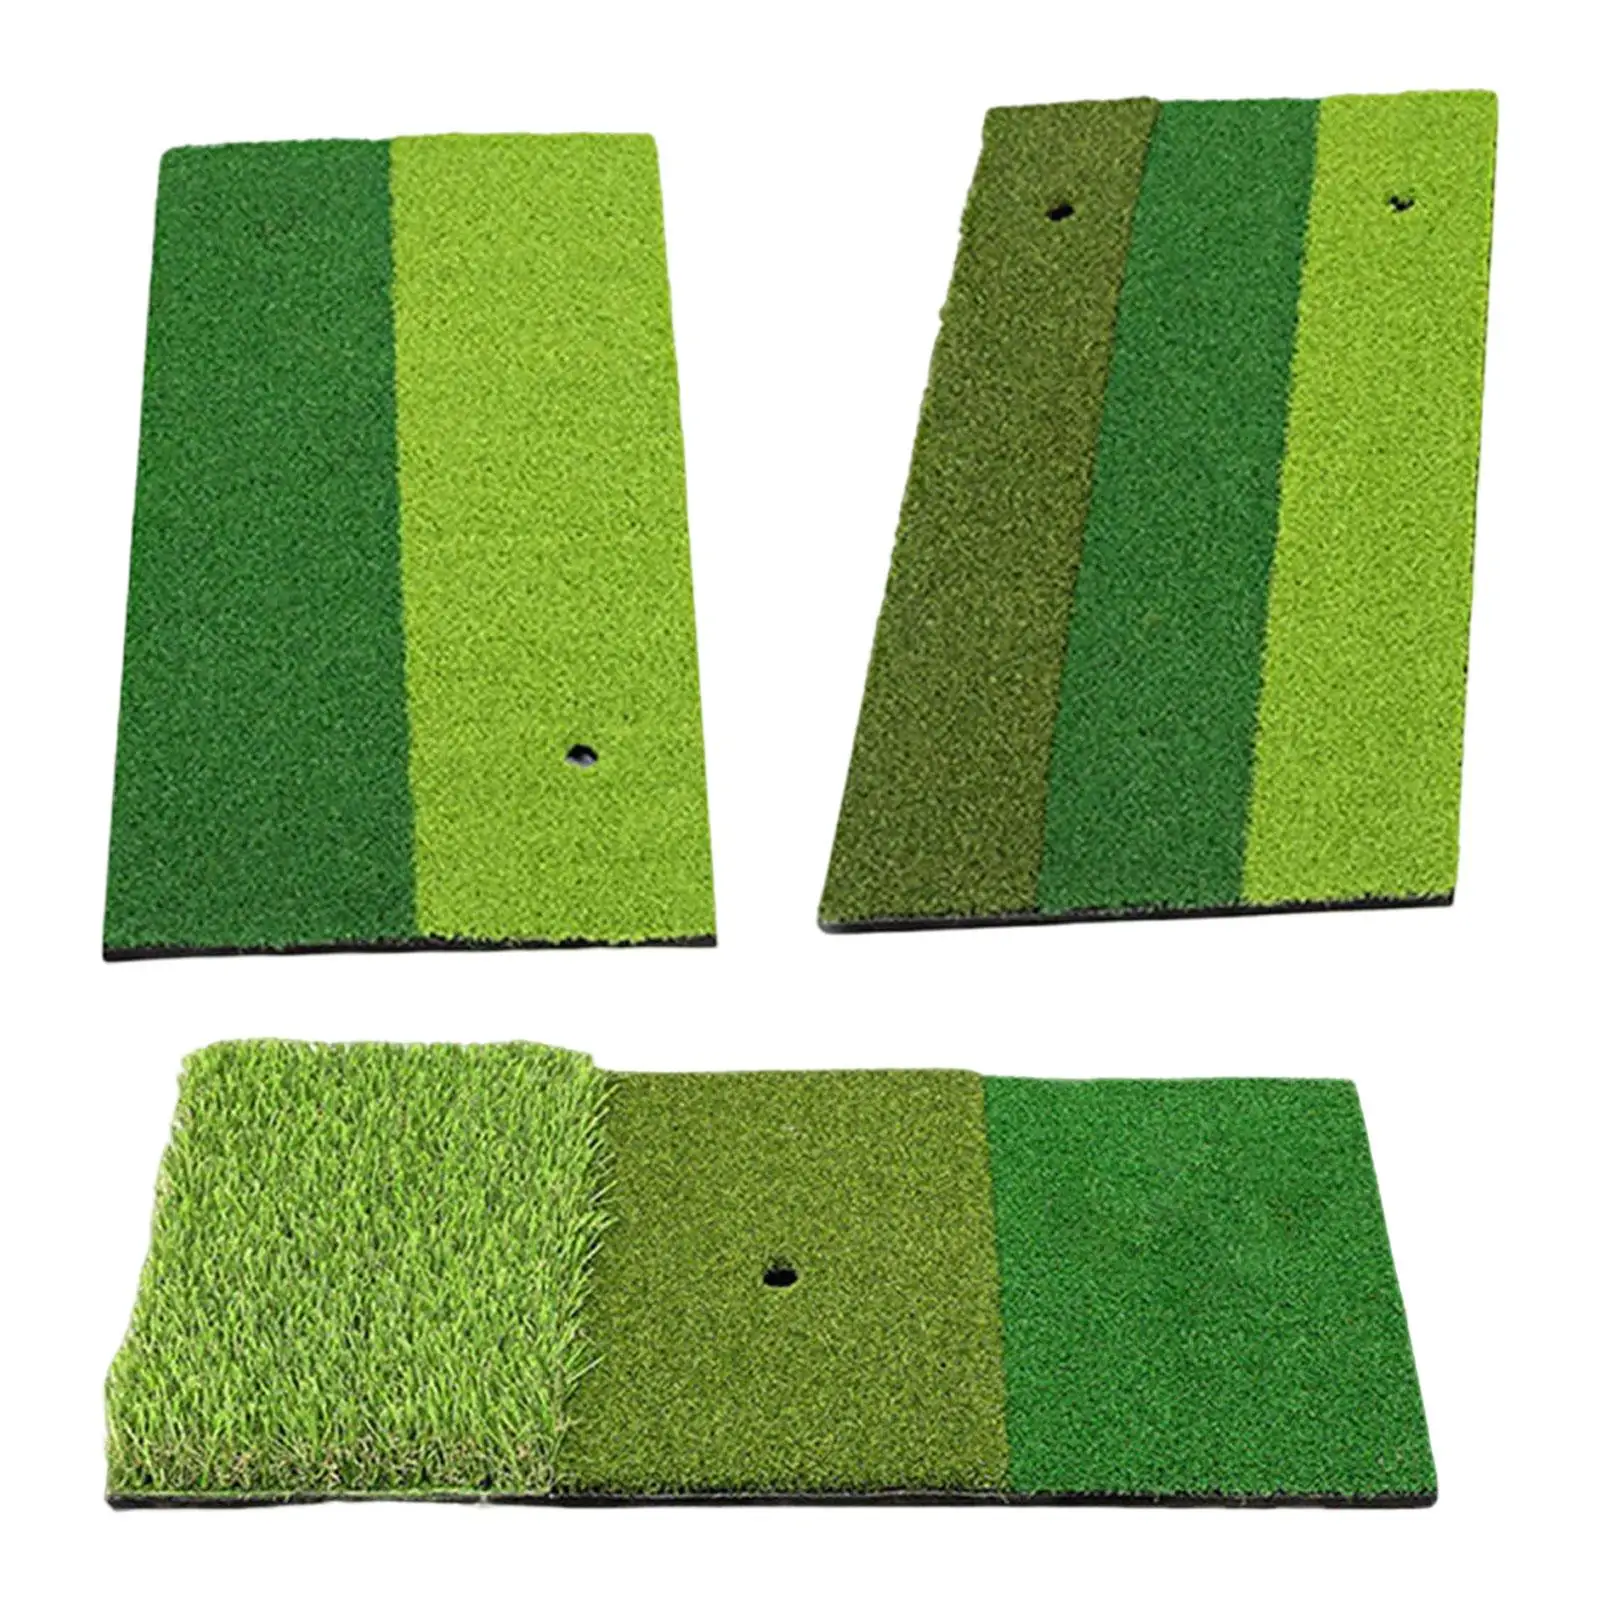 Golf Hitting Mat Golf Training Durable for Indoor Outdoor Gifts Adults